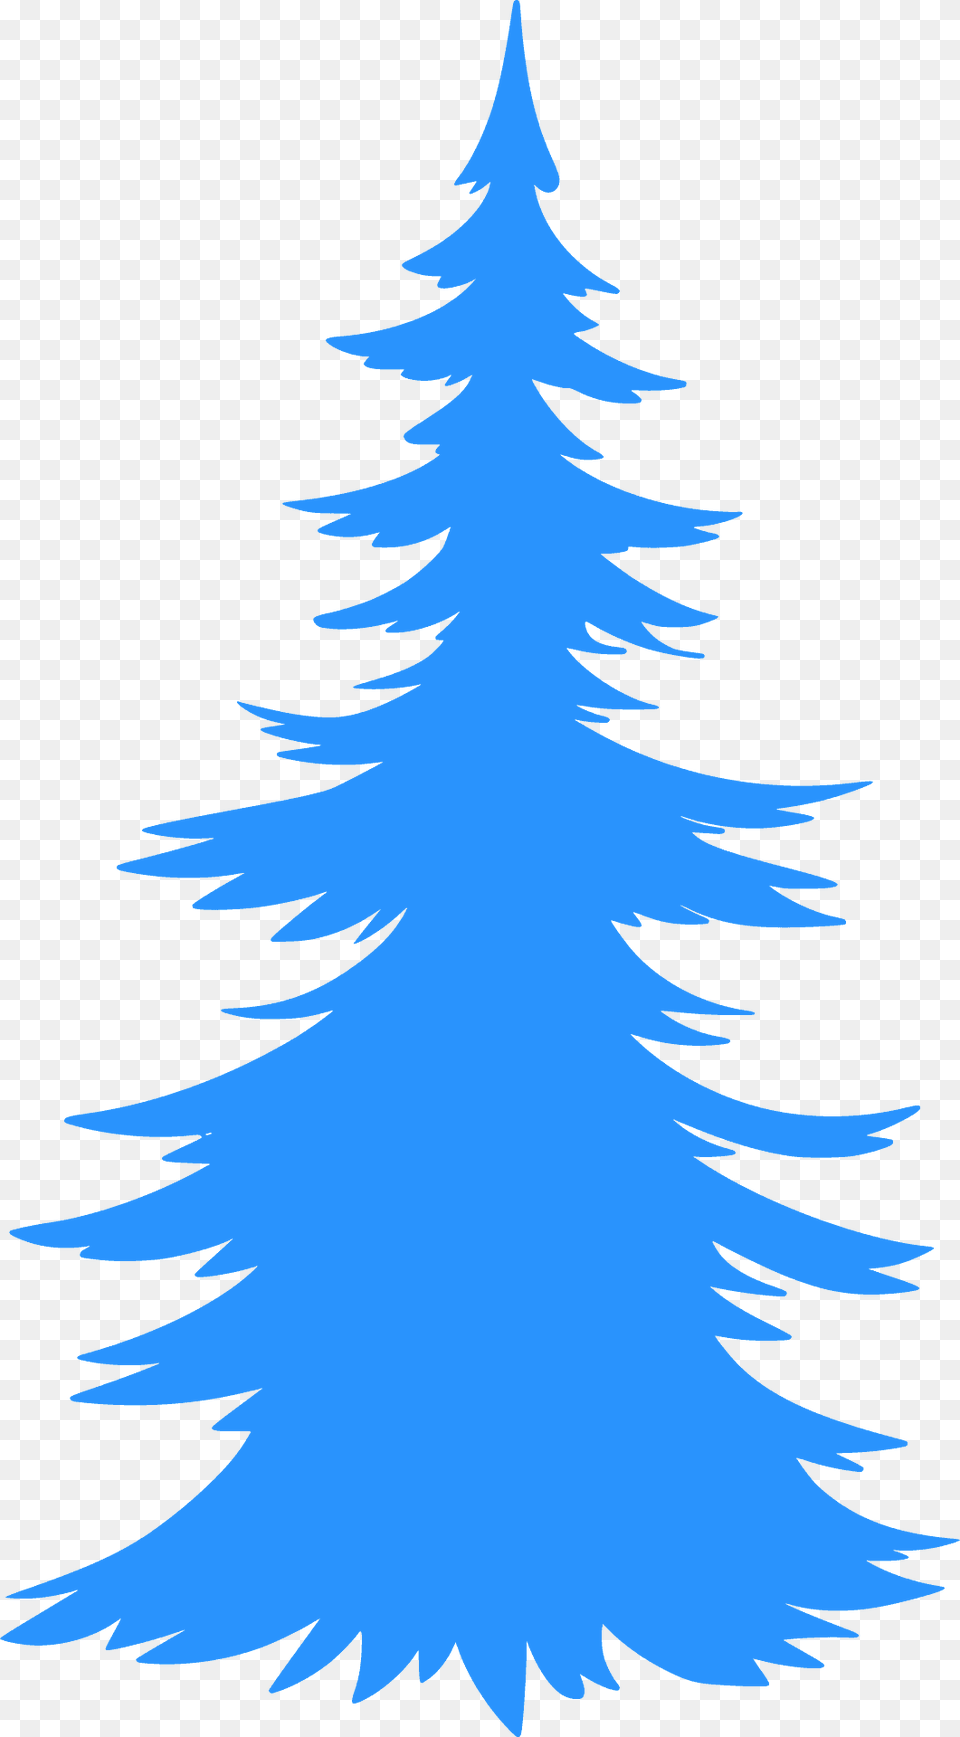 Evergreen Tree Silhouette, Plant, Fir, Fish, Sea Life Png